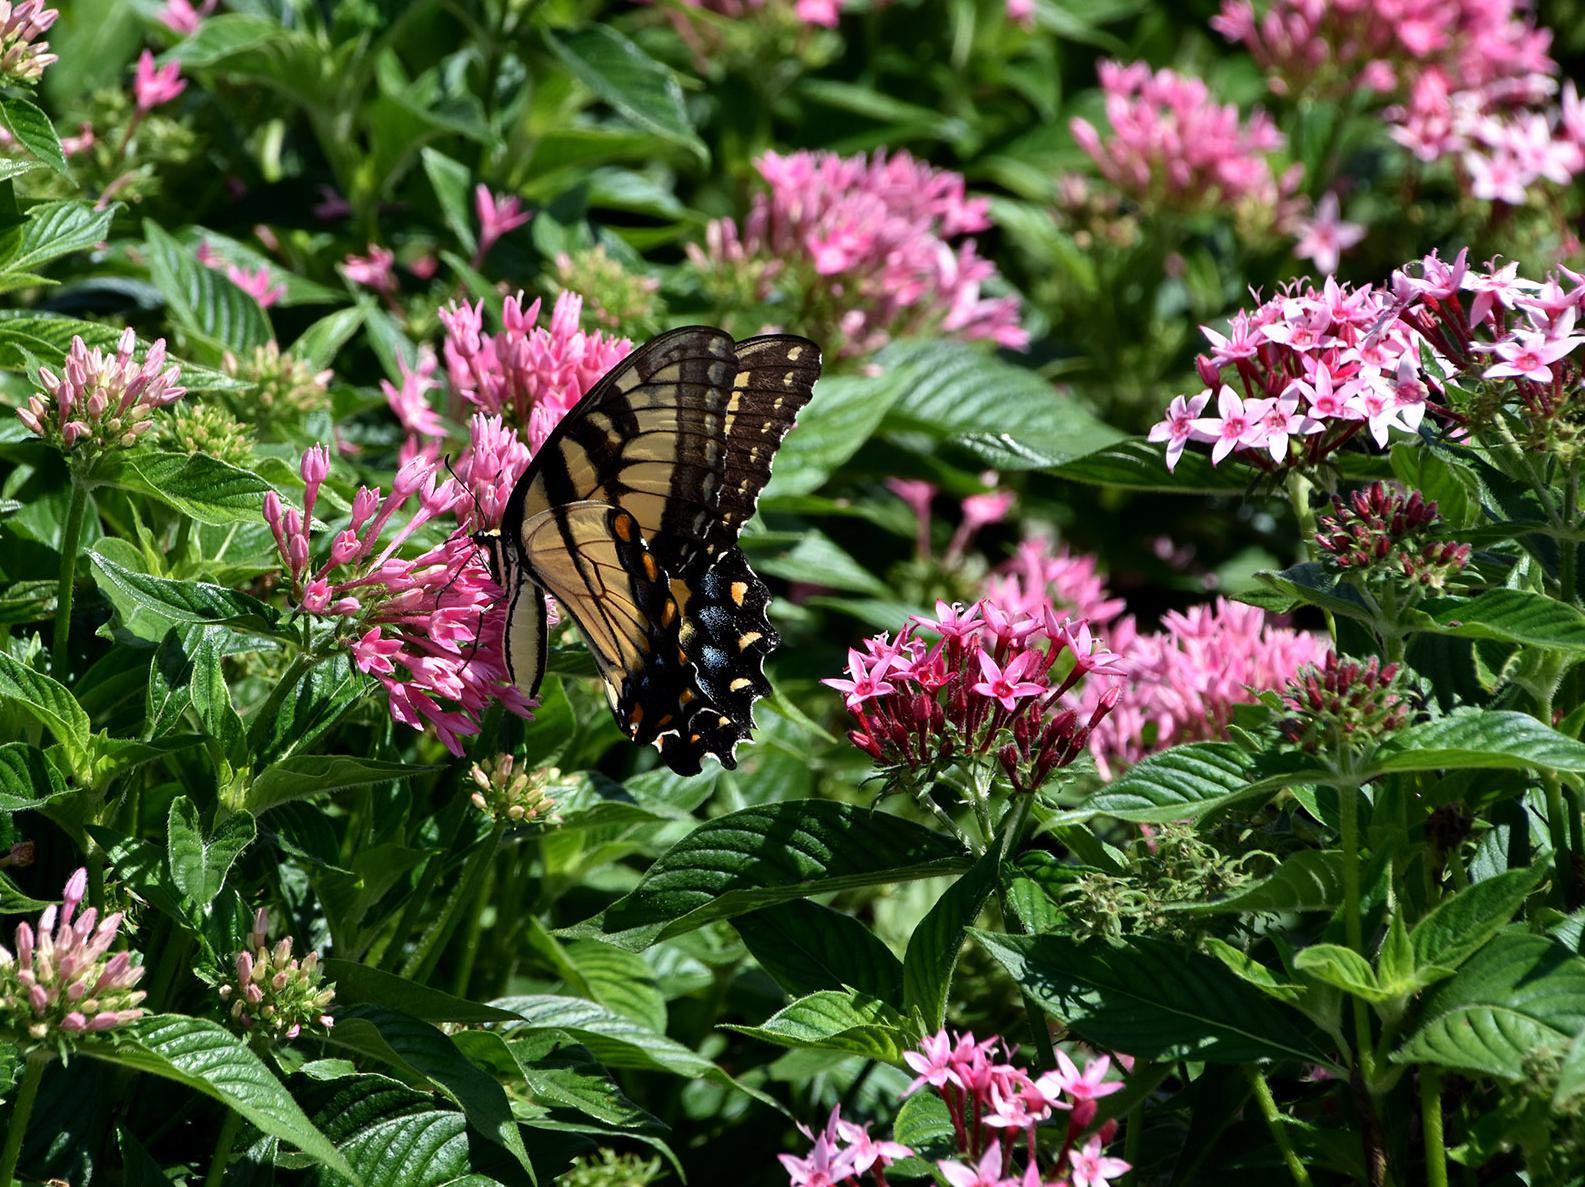 A tiger swallowtail butterfly rests on a cluster of pink blooms rising above green leaves.